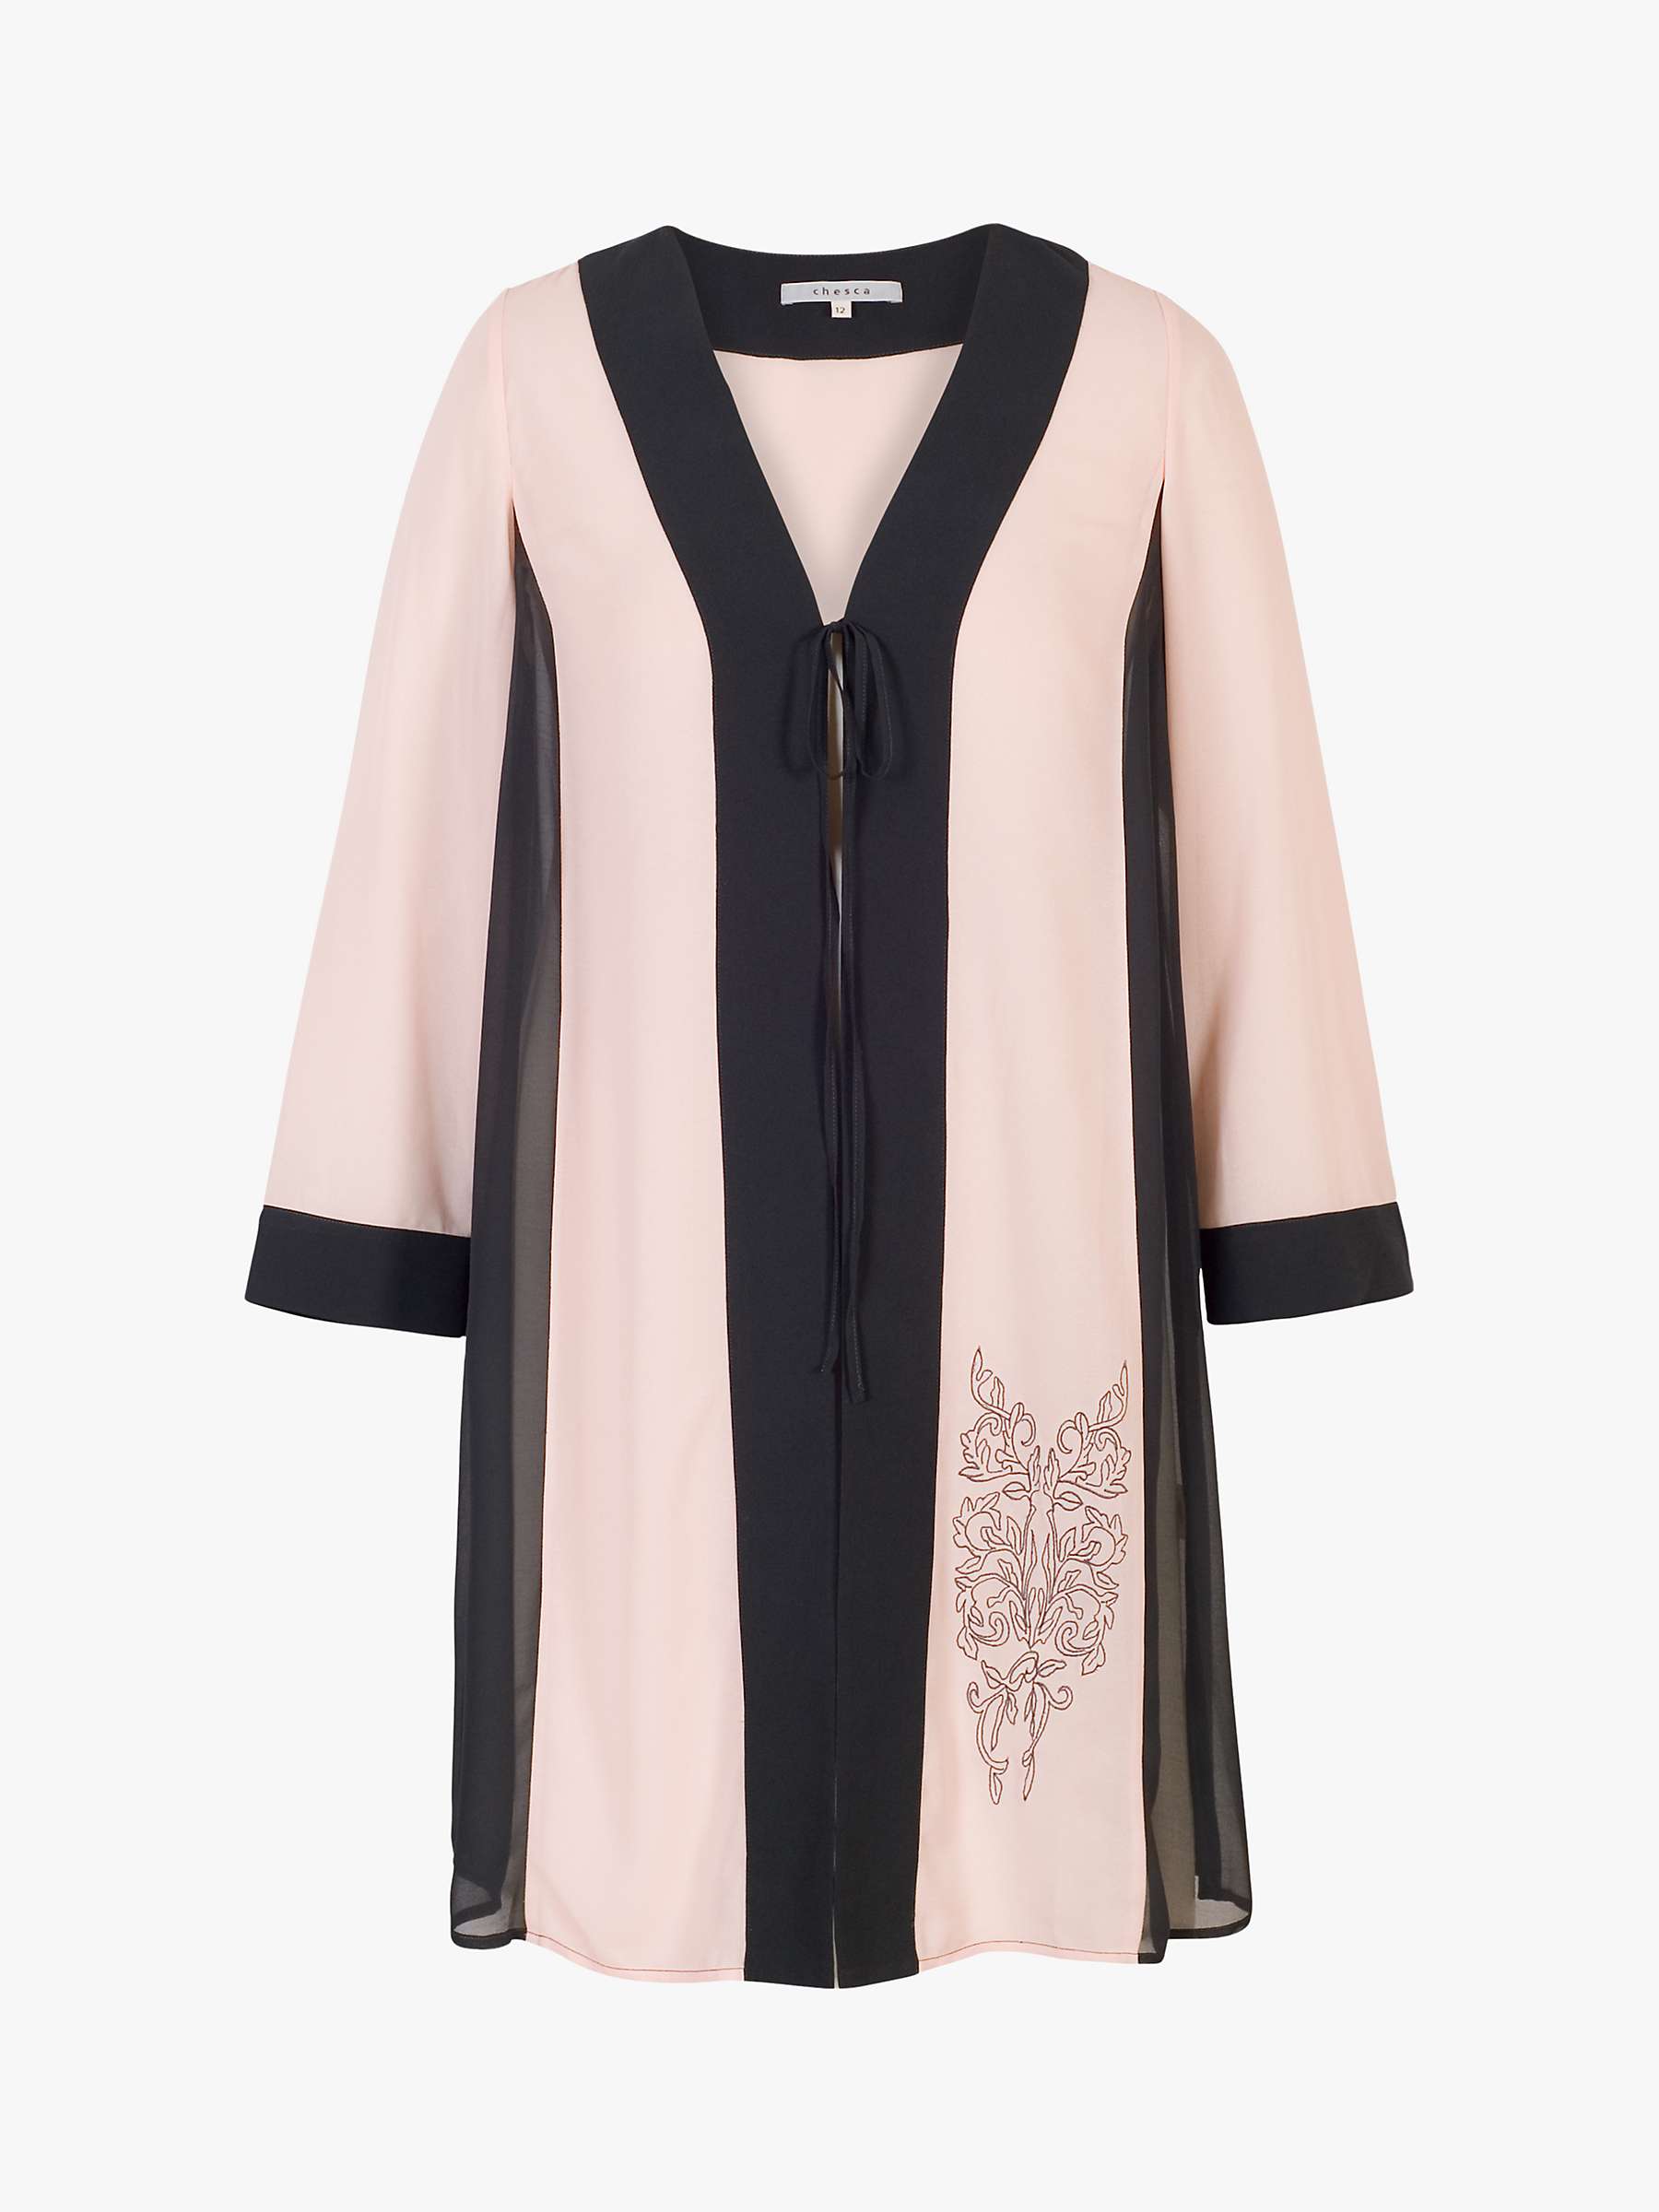 Buy Chesca Contrast Trim Embroidered Chiffon Coat, Smoke/Shell Online at johnlewis.com